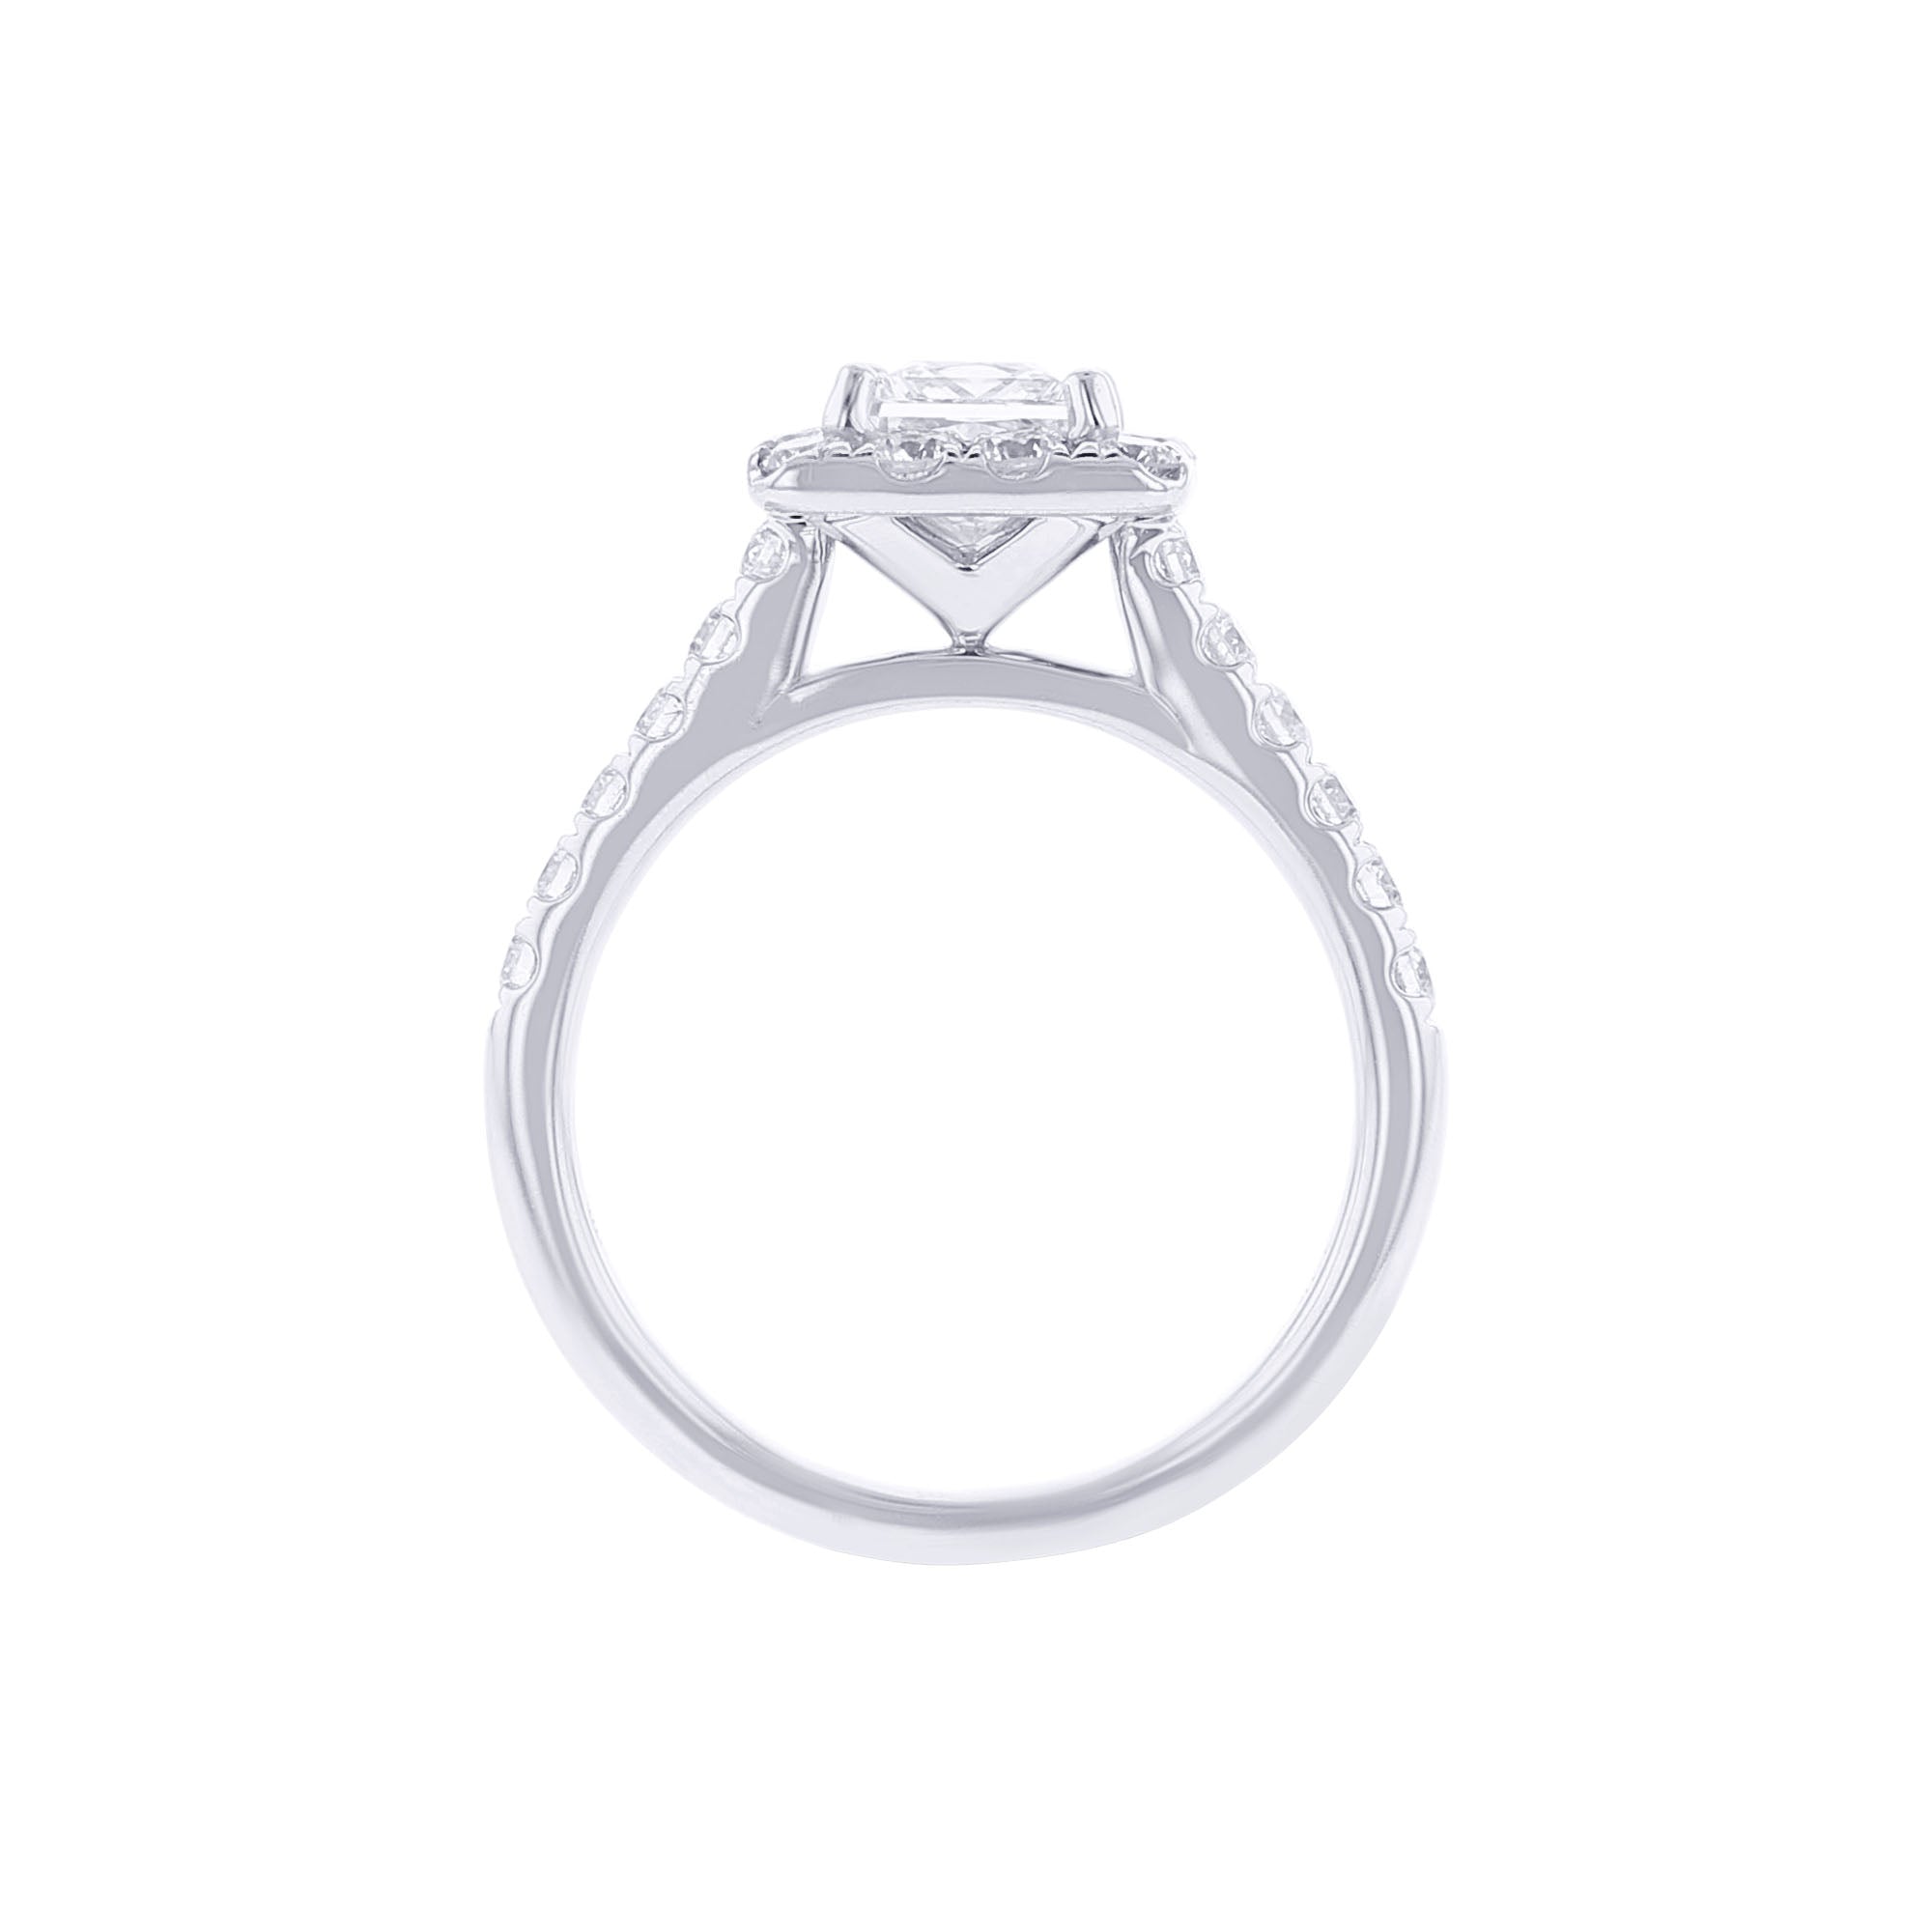 Valentina Certified Ready for Love Diamond Engagement Ring